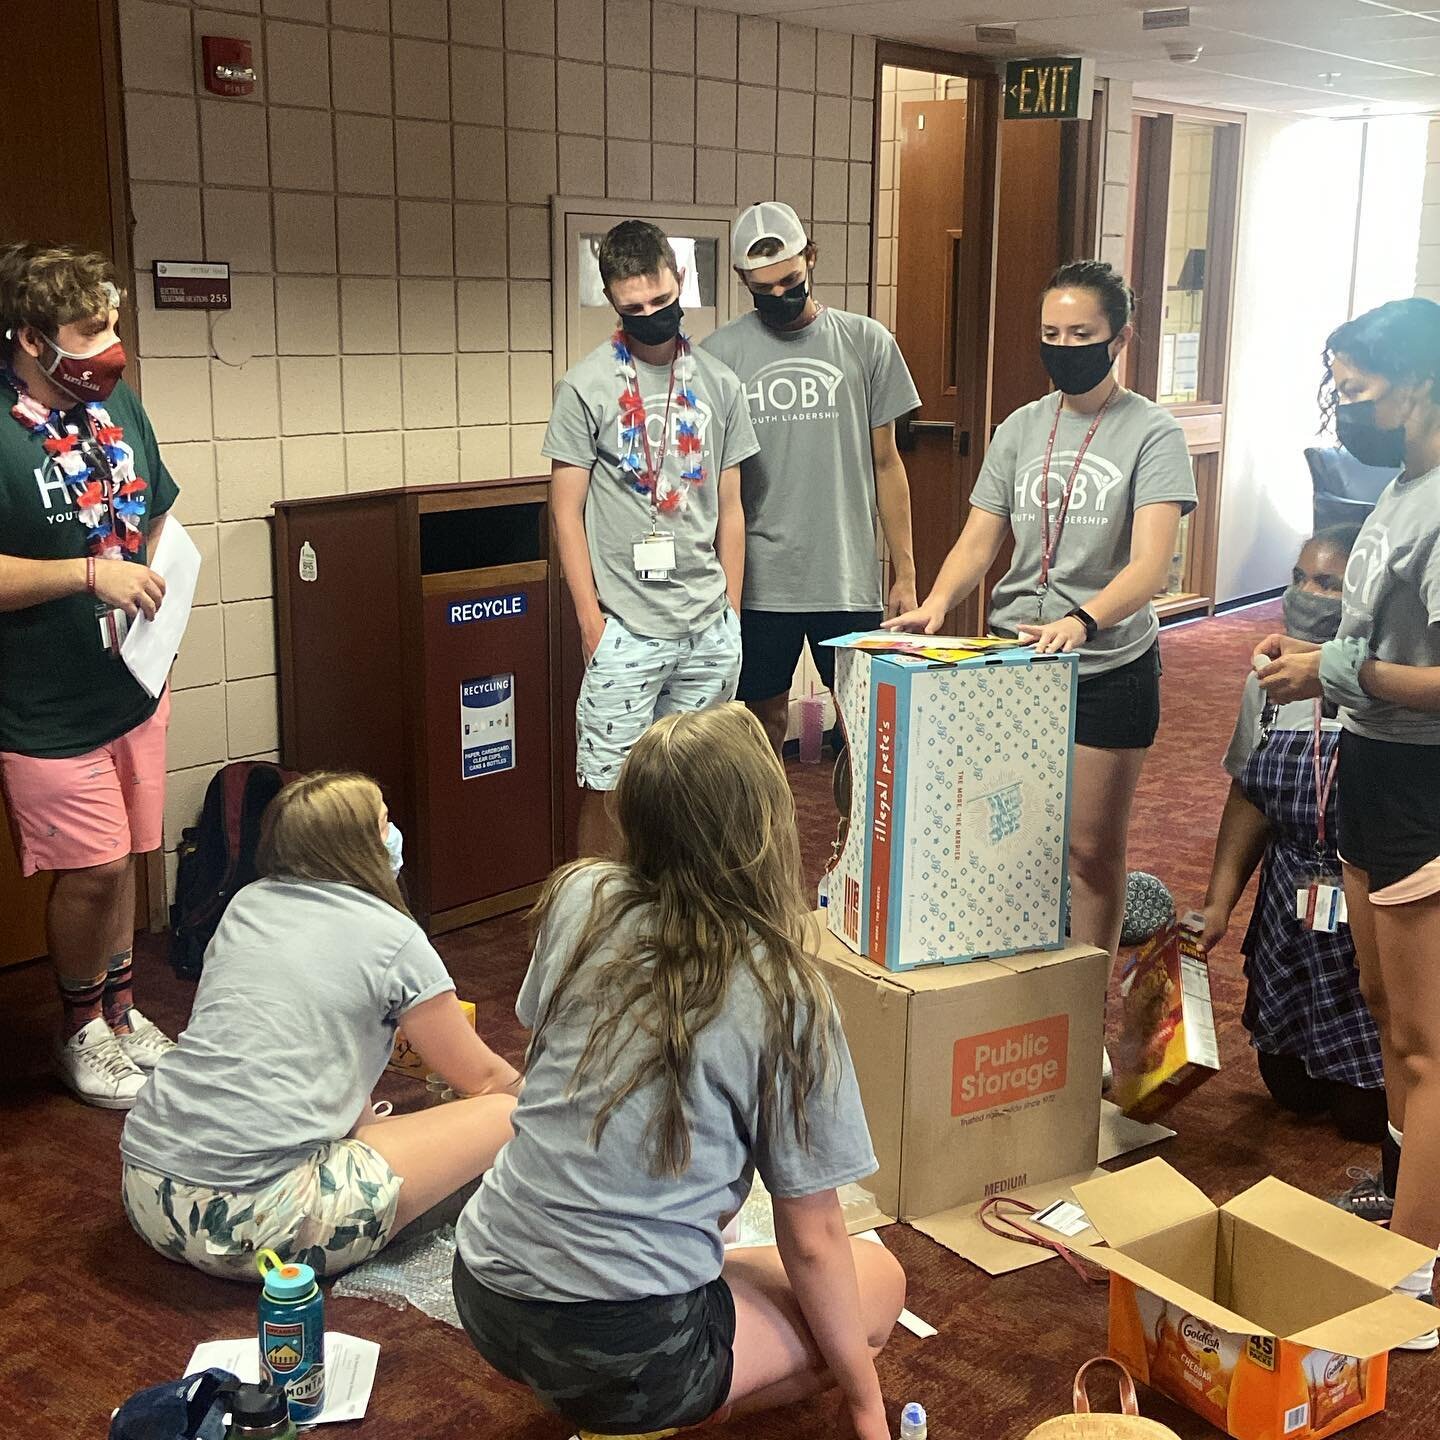 &ldquo;Working with others is called Collaboration and working with them for a goal that we agree on is called Common Purpose&rdquo;

HOBY Colorado is onto our second phase of leadership: Group Leadership! 

@hobycolorado #HOBYCO2022 #IgniteYourPath